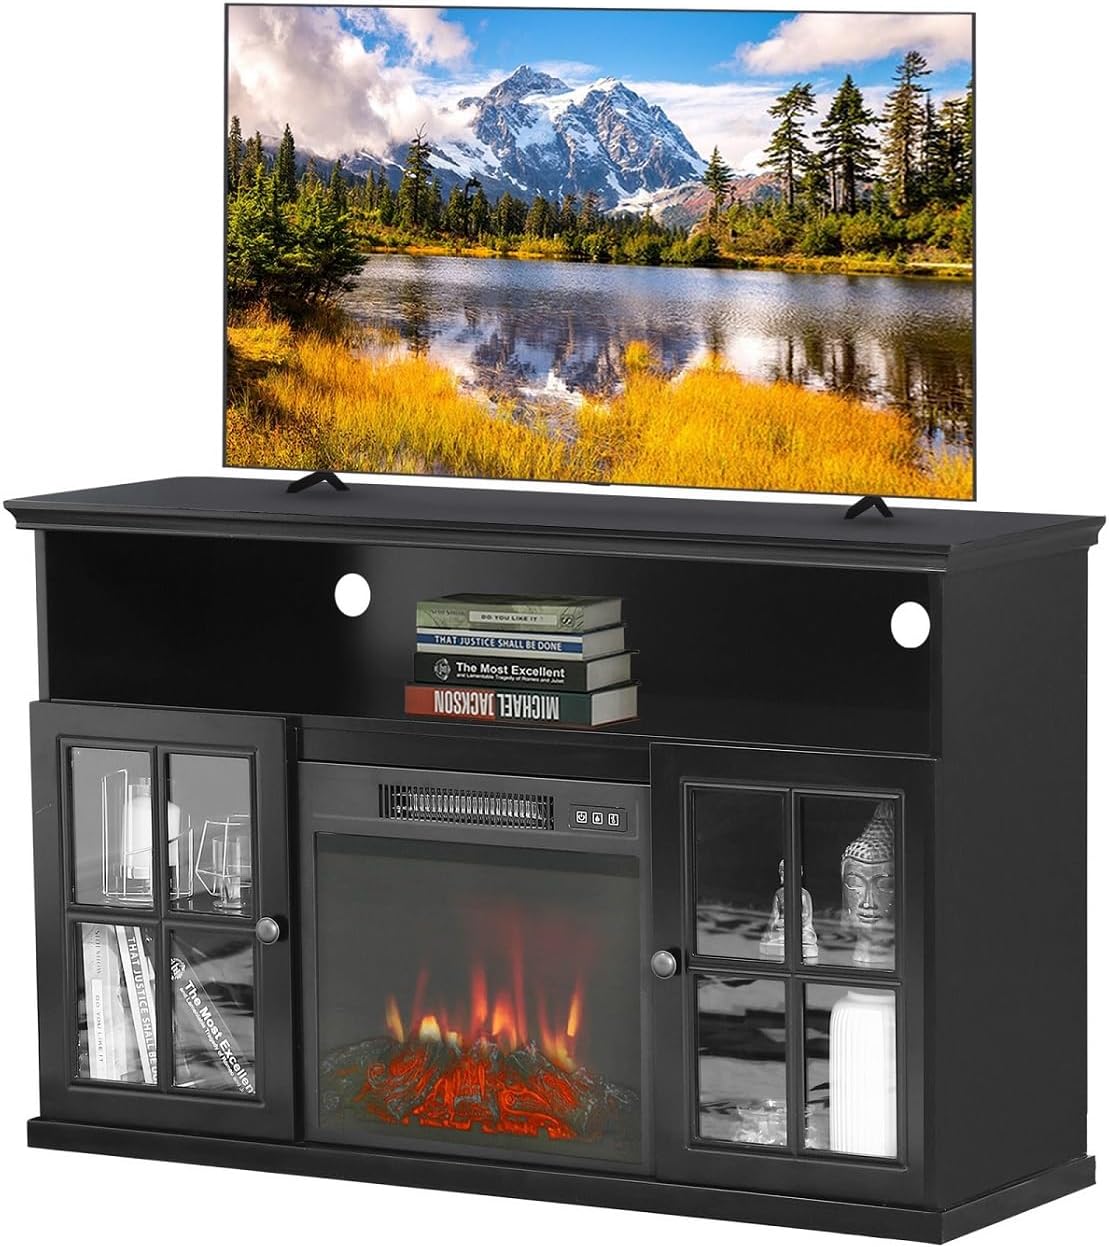 MFSTUDIO Farmhouse Electric Fireplace TV Stand for TV' Up to 55 Media Entertainment Center Console with Insert Fireplace and Adjustable Shelves Storage Cabinet Chest for Living Room, Black